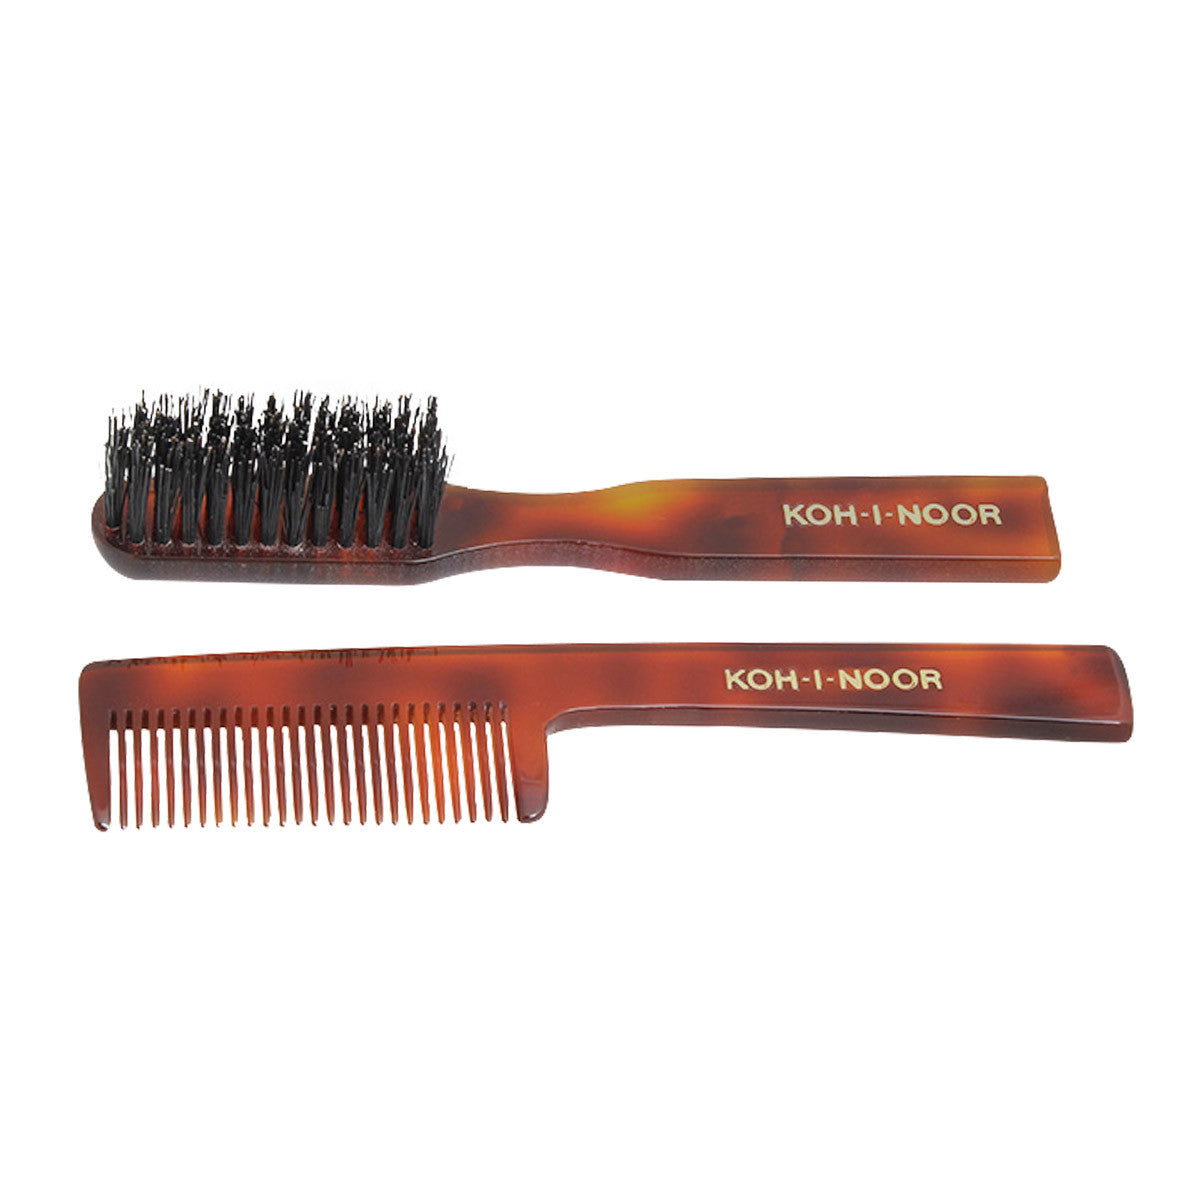 Primary image of Beard and Mustache Comb and Brush Set